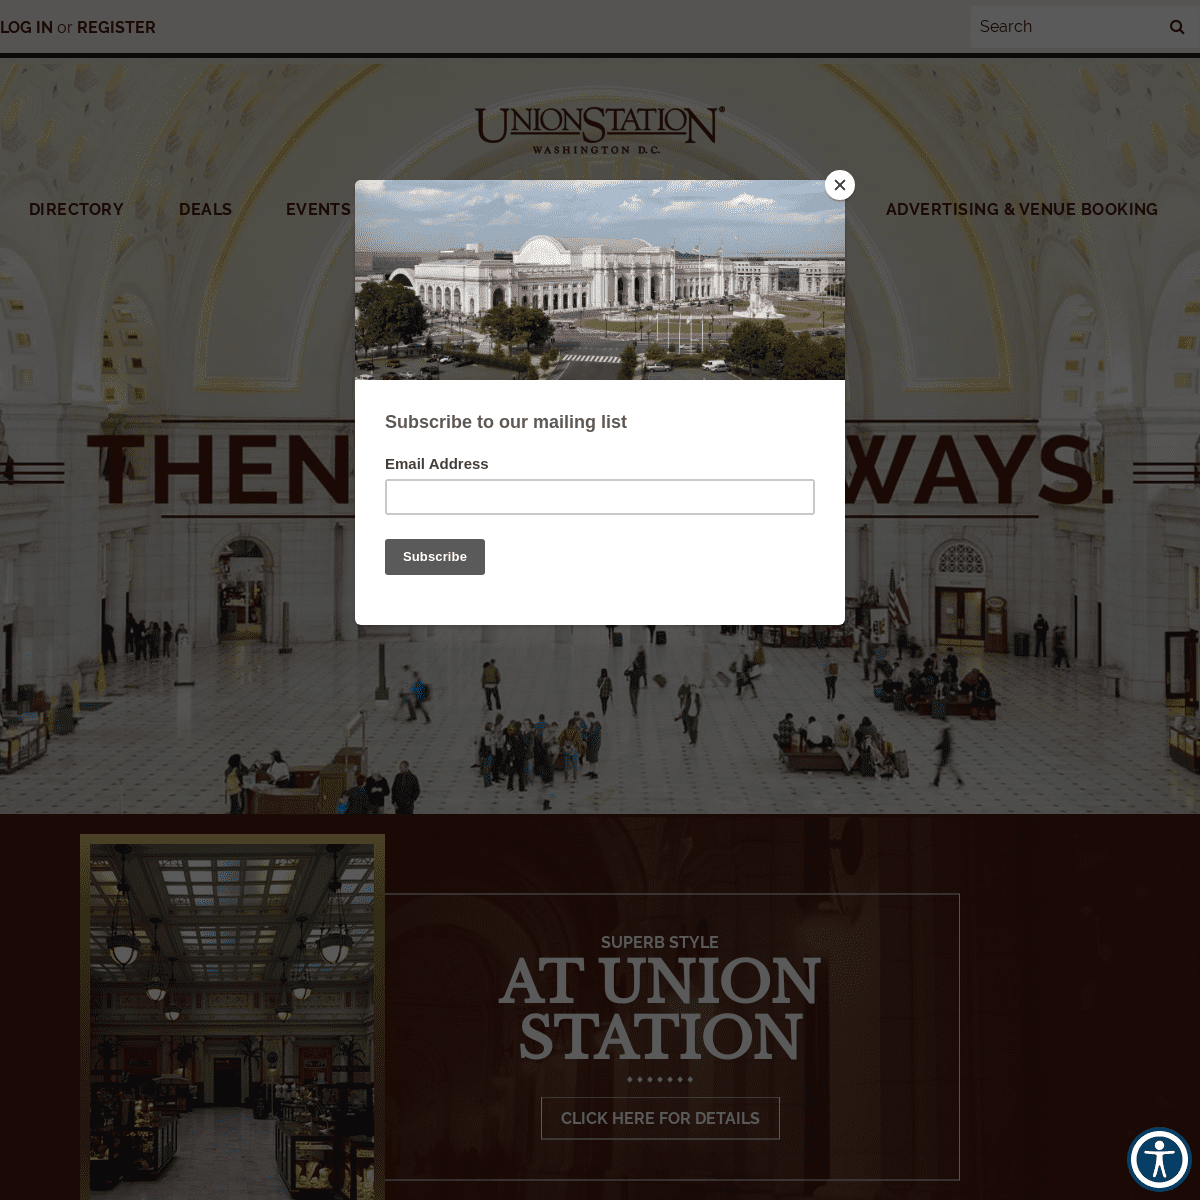 A complete backup of unionstationdc.com